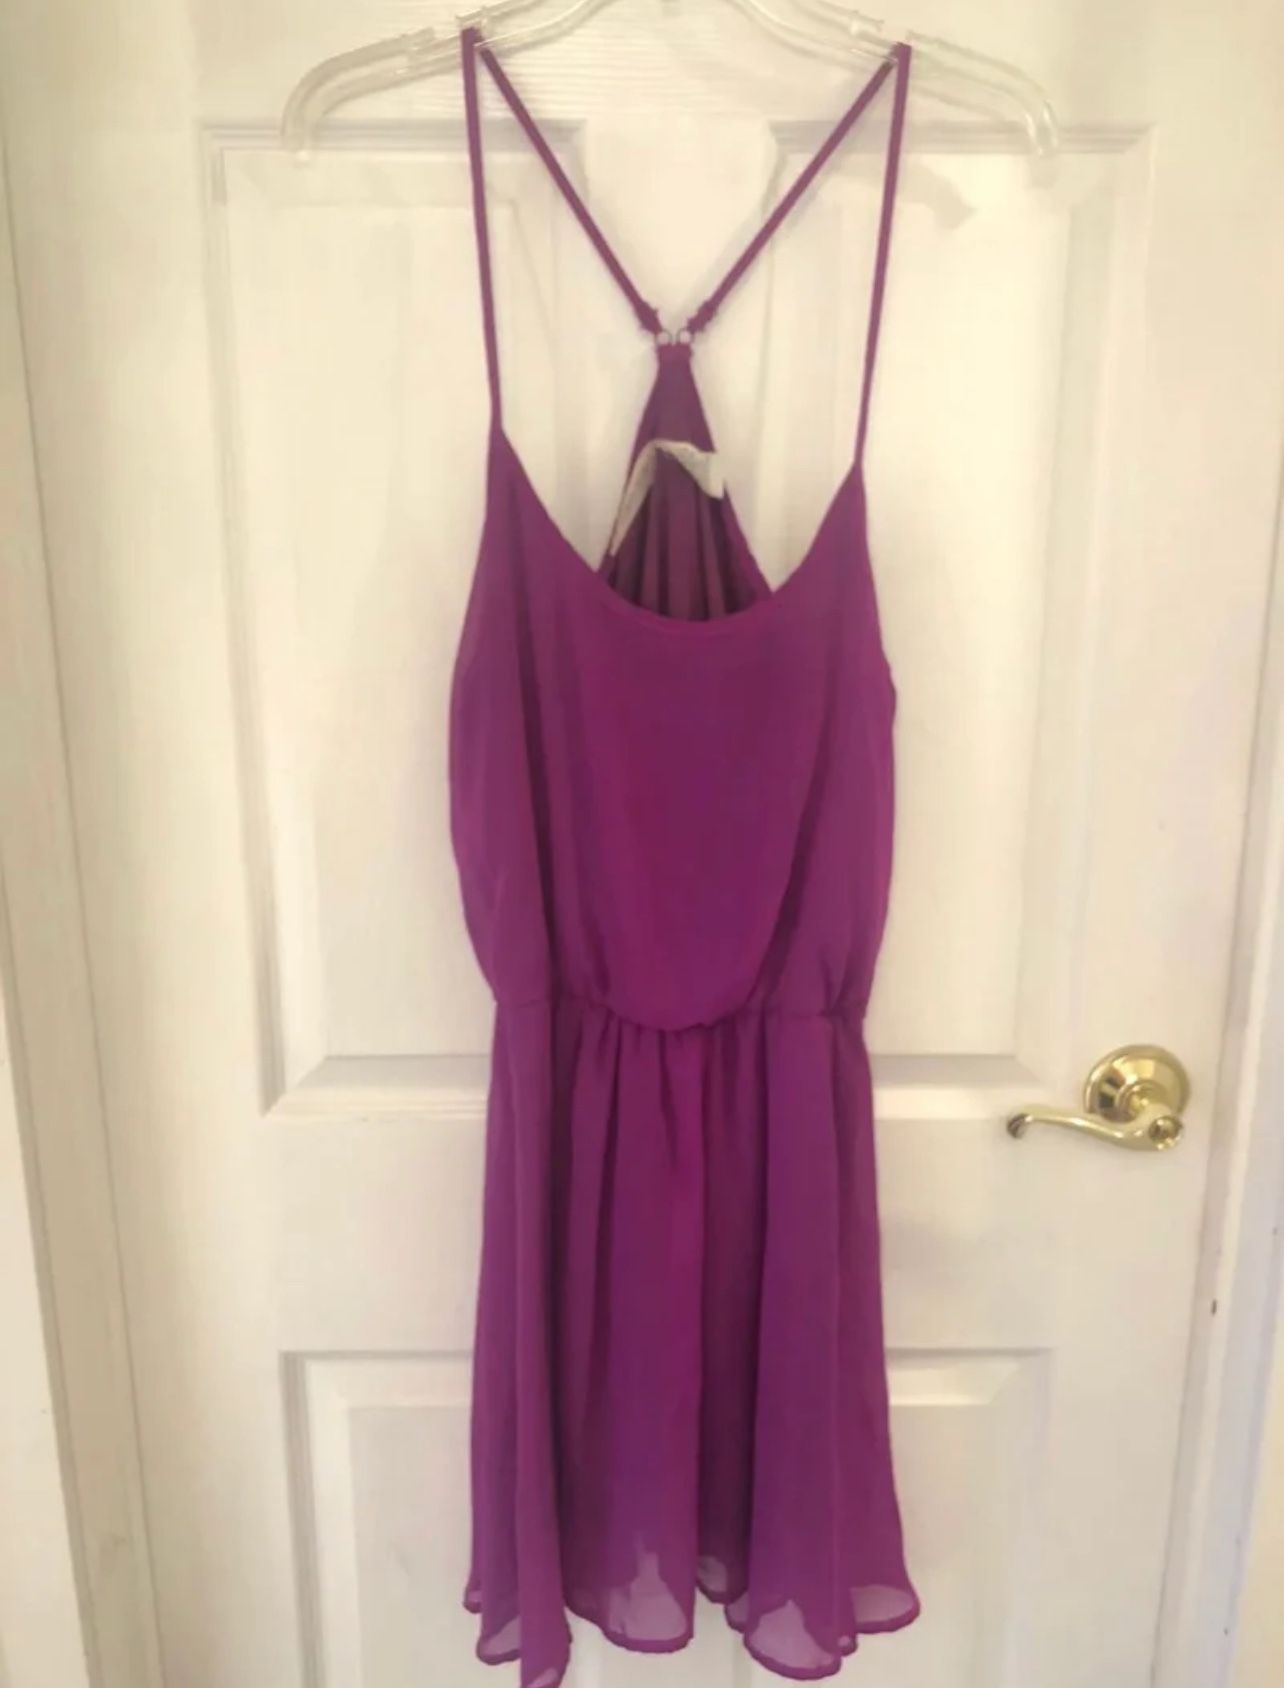 Size L bright purple silky dress with spaghetti straps by Mimi Chica  Lined so it’s not see through